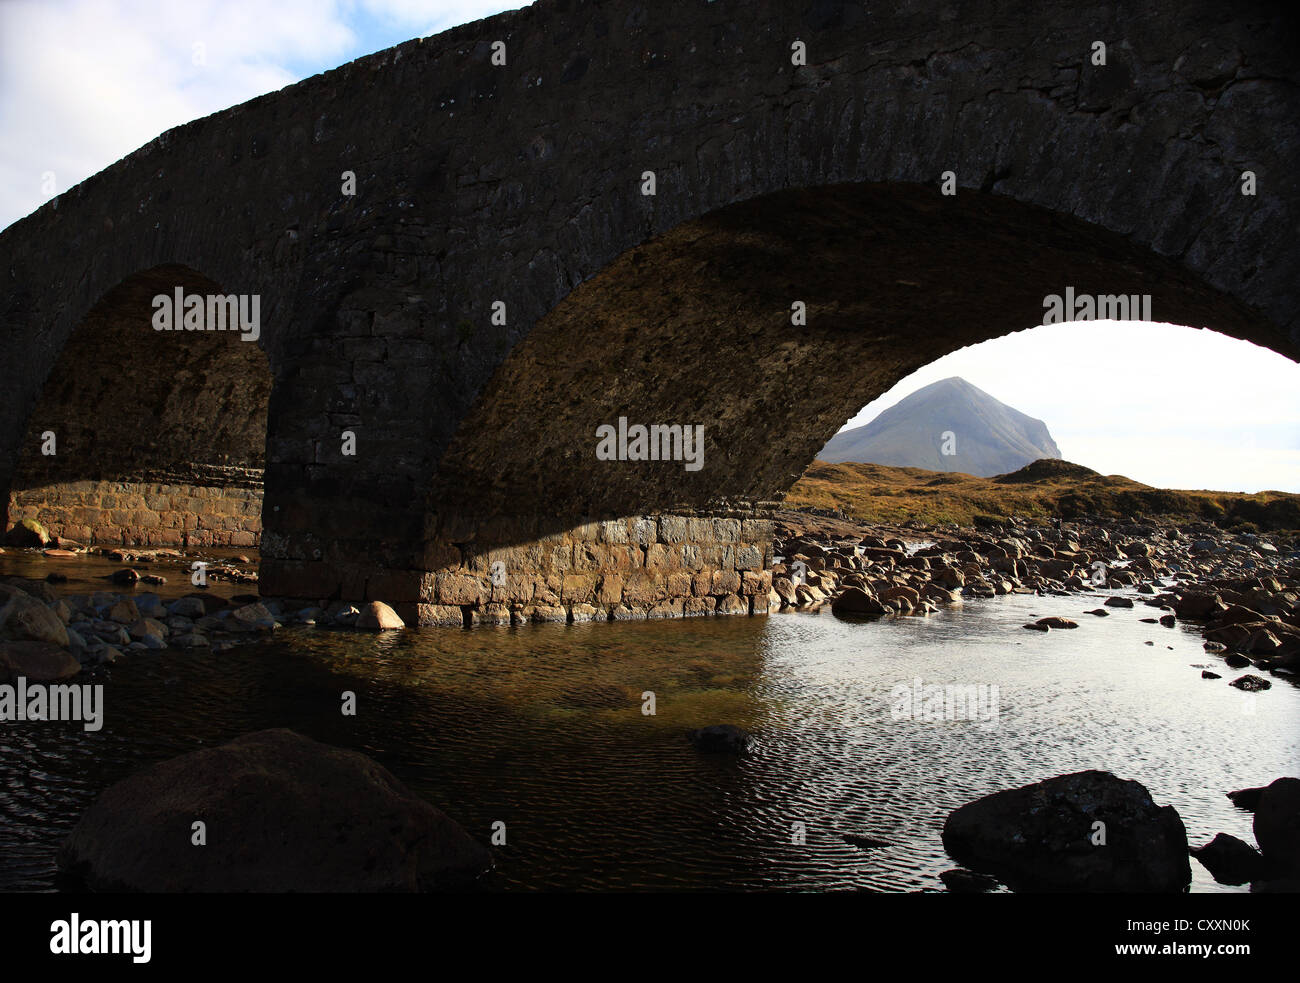 A mountain in the Cuillin Range on the Isle of Skye in the Scottish Highlands seen through an arch of the Sligachan Bridge. Stock Photo